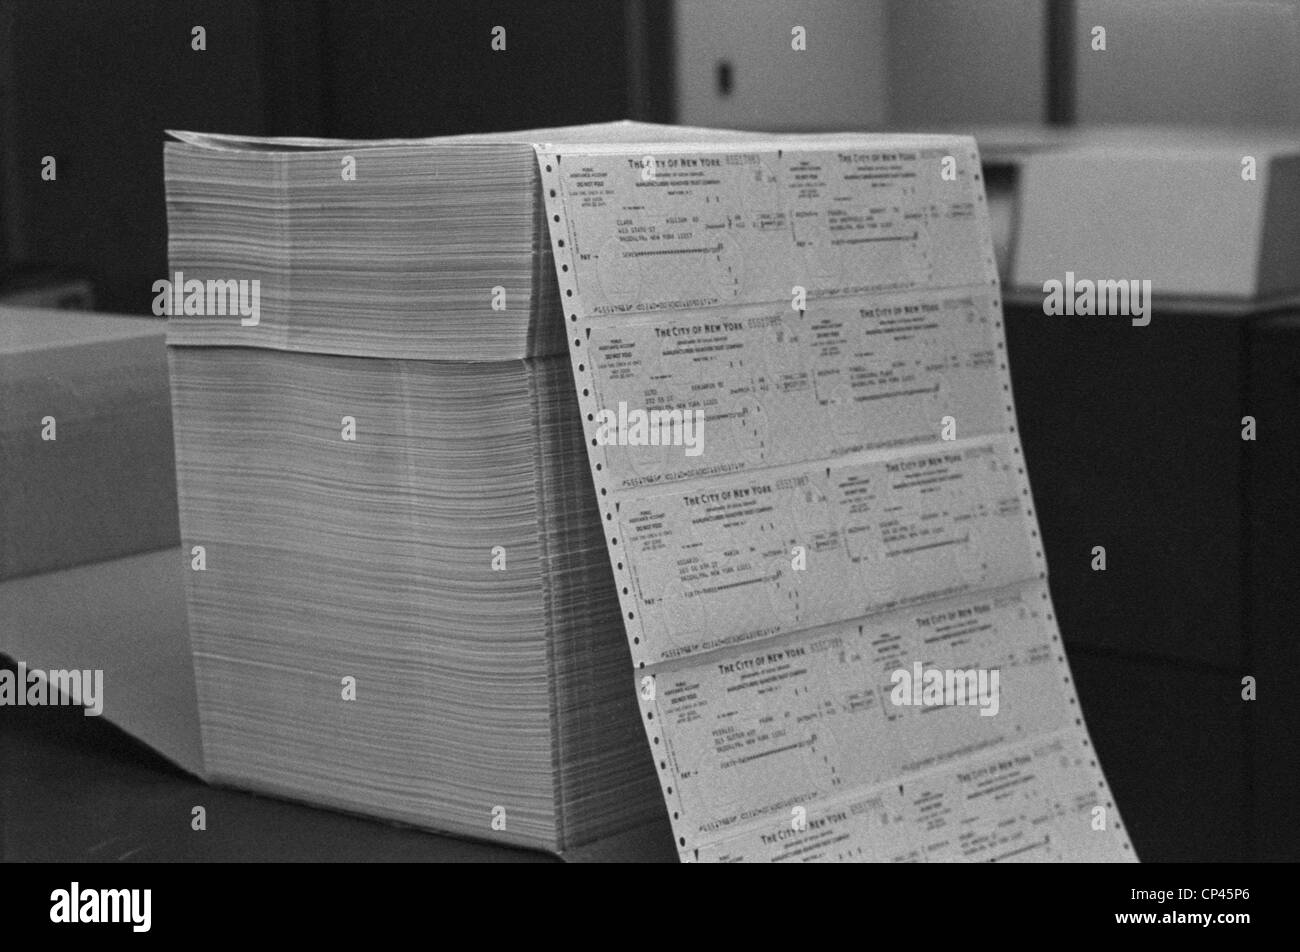 Large stack of computer generated welfare checks at a New York City welfare office. May 24 1976. Stock Photo